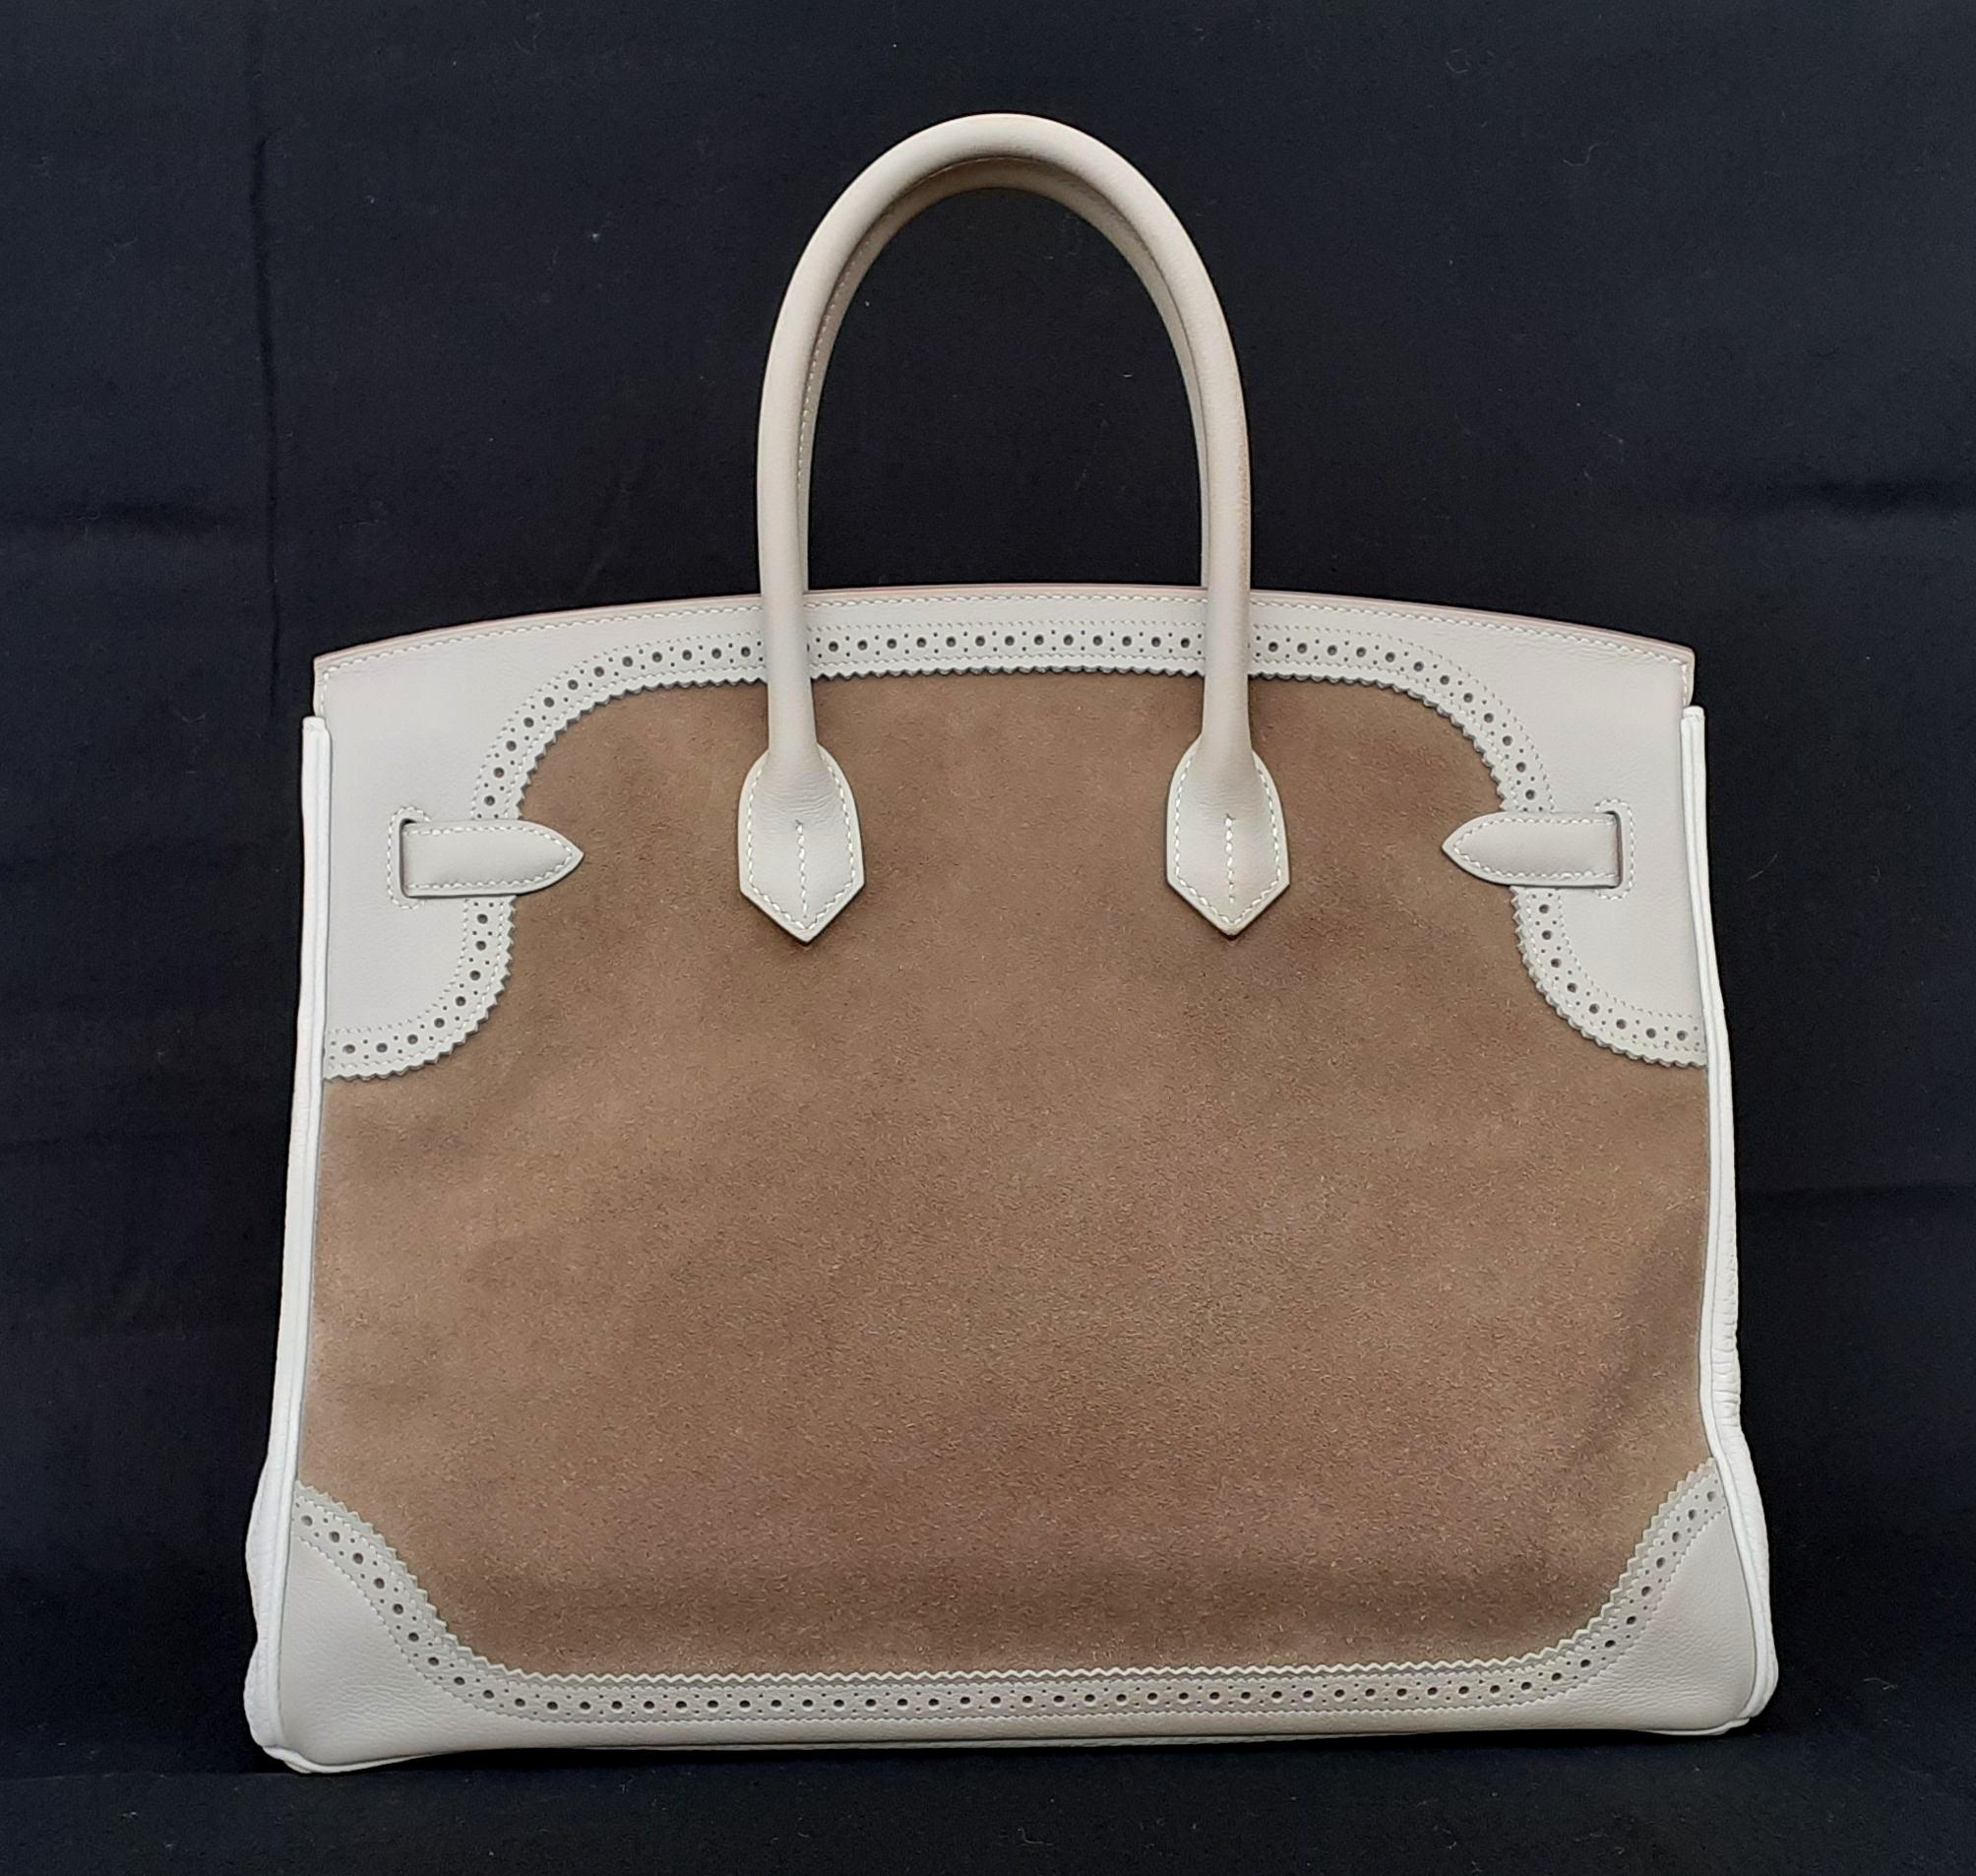 Exceptional and Gorgeous Authentic Hermes Handbag

